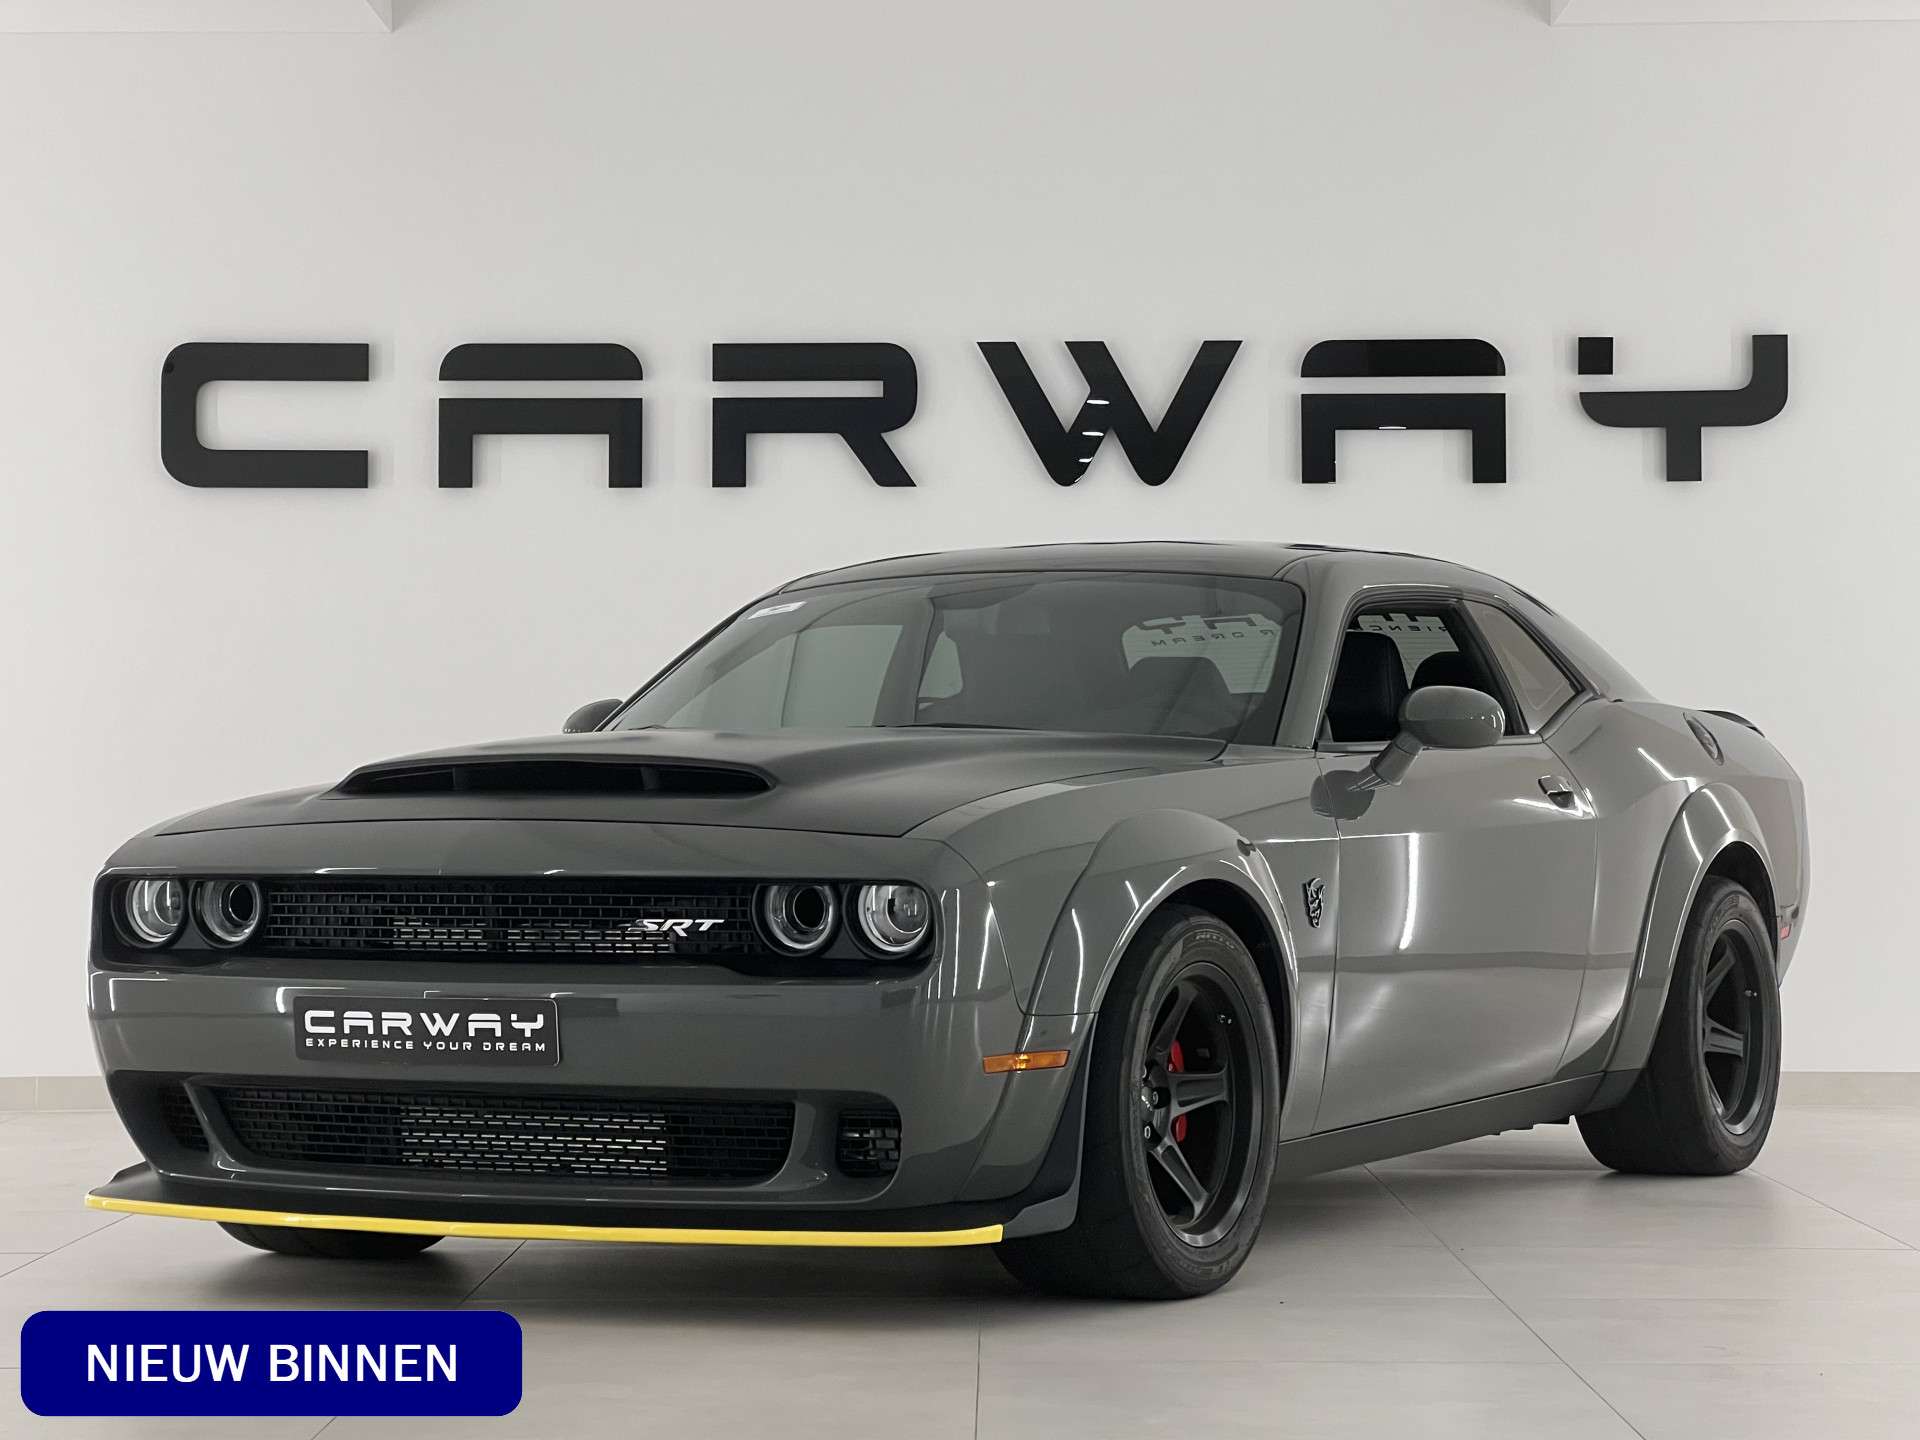 Dodge Challenger Coupe in Grey used in AMSTERDAM for € 349,000.-